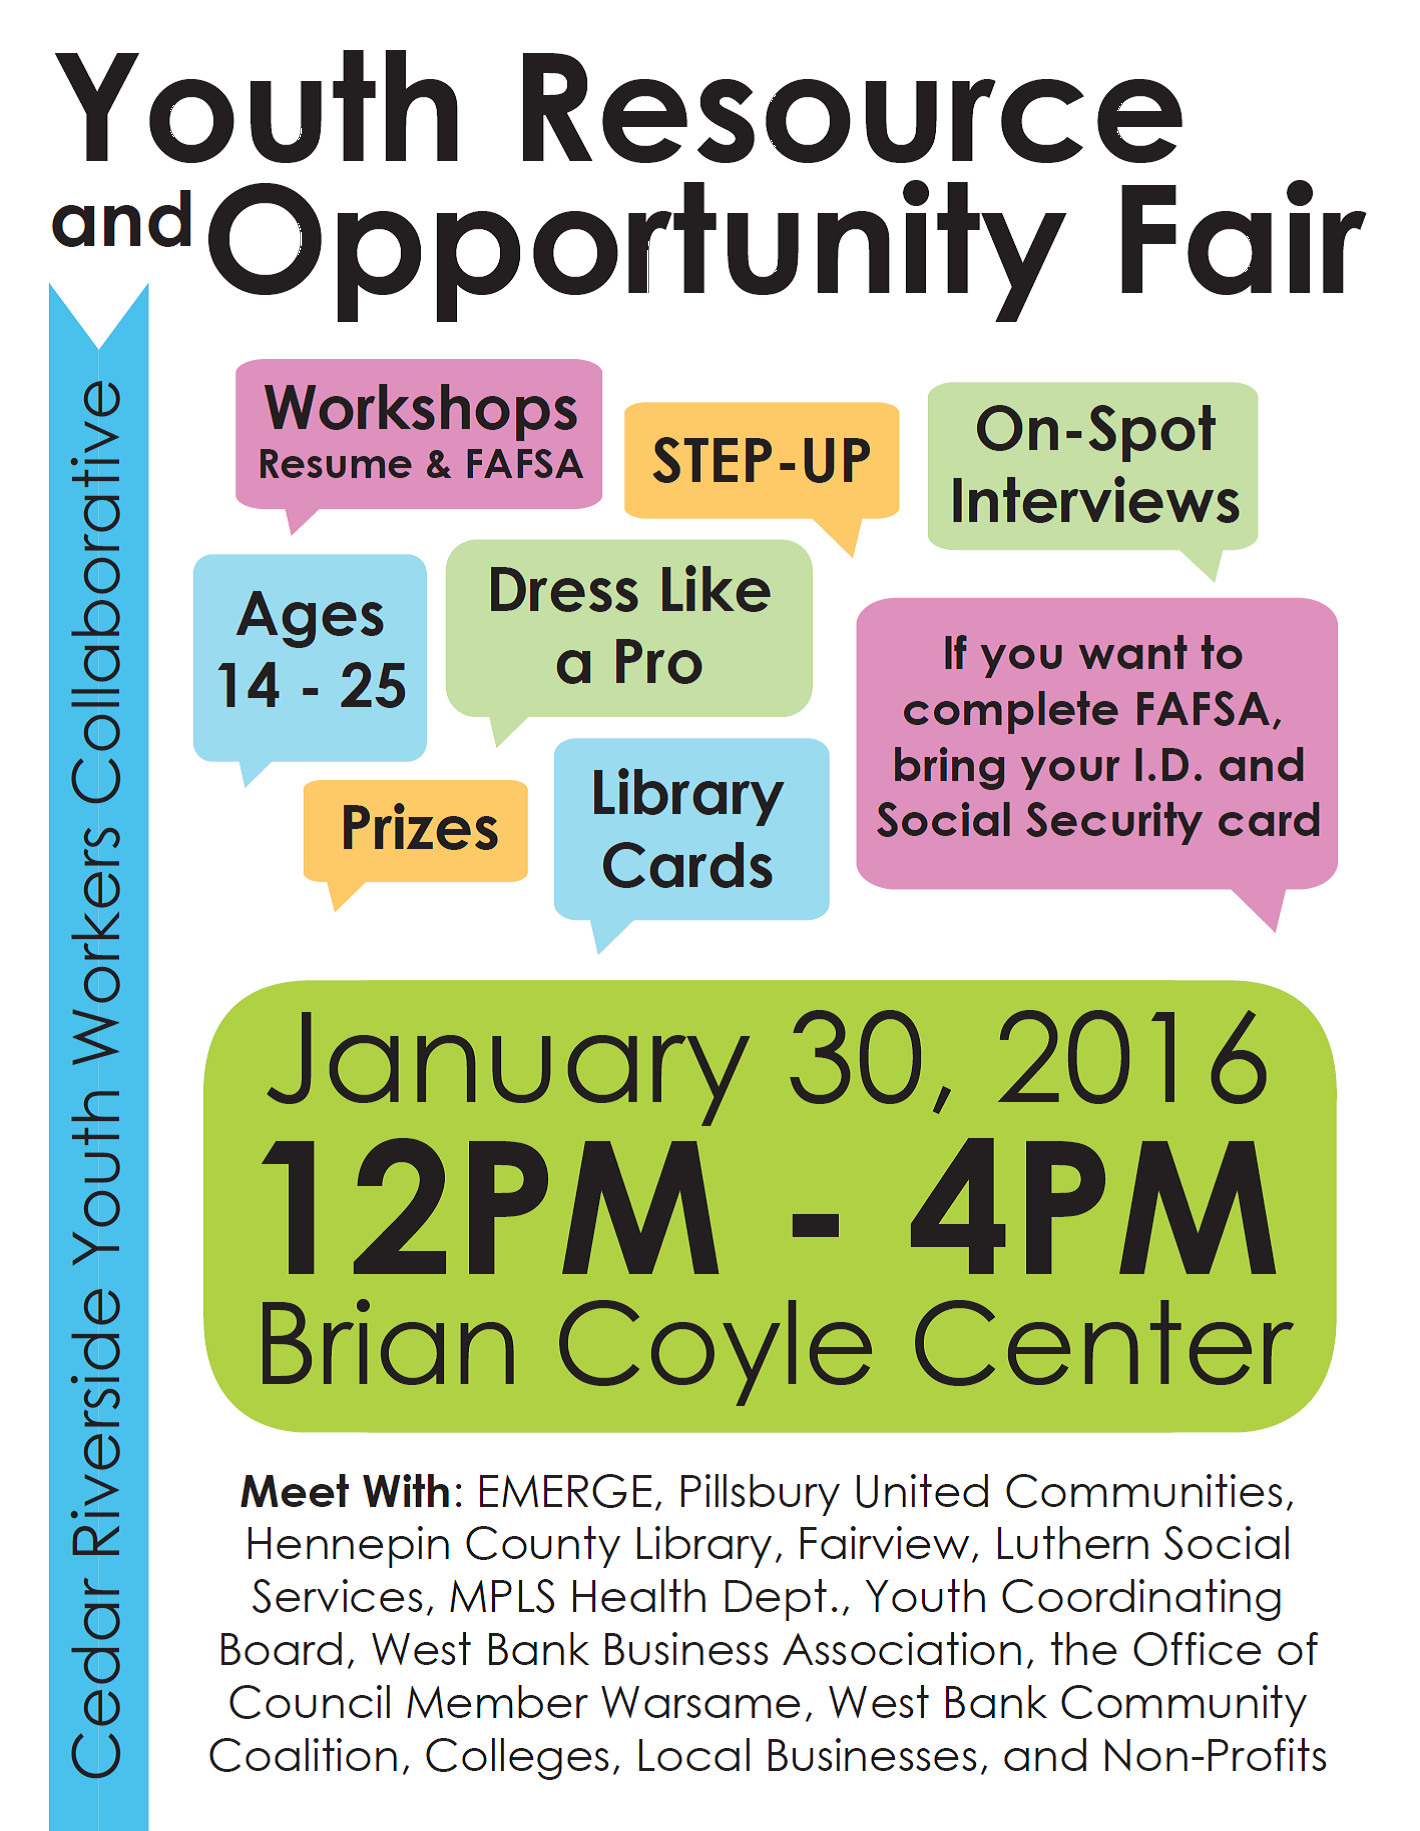 Youth Resource and Opportunity Fair at Brian Coyle Center 01-30-16